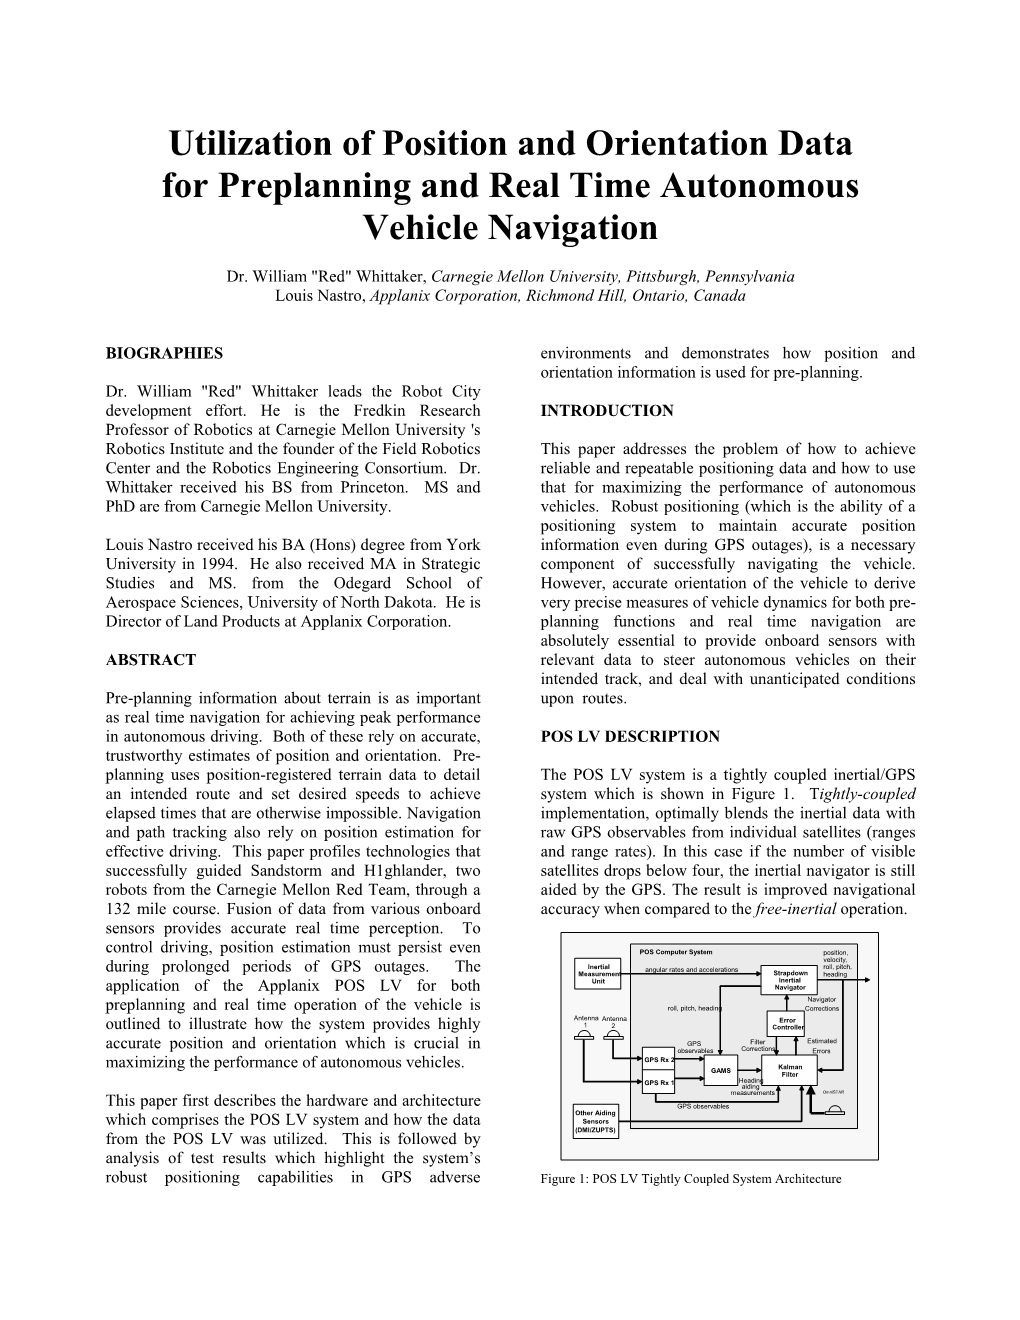 Utilization of Position and Orientation Data for Preplanning and Real Time Autonomous Vehicle Navigation